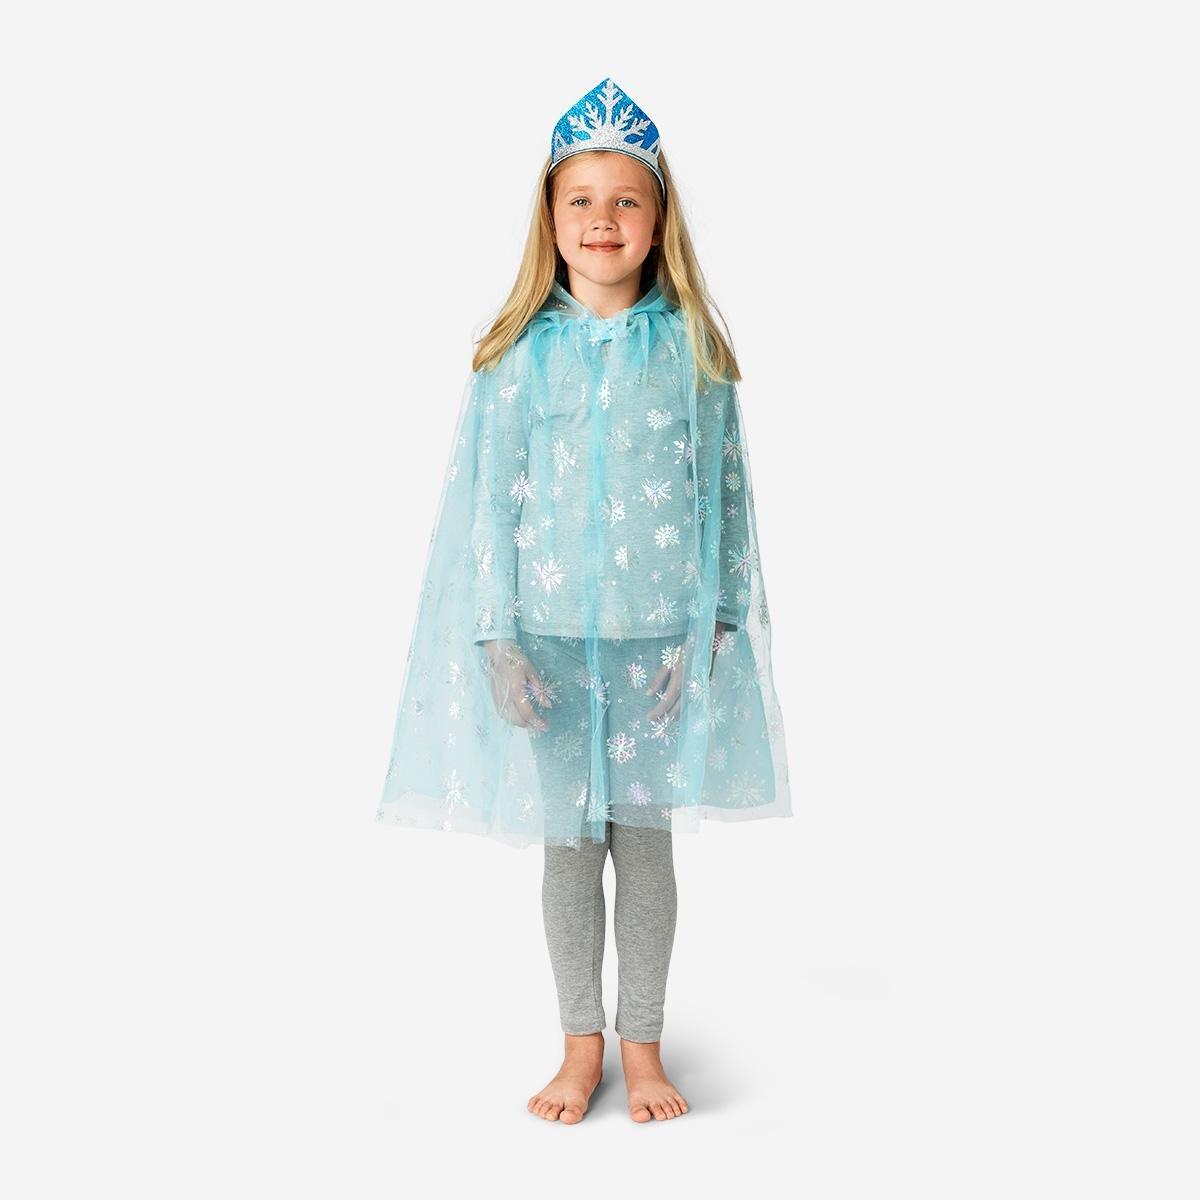 Blue ice princess costume accessories. 4-8 years